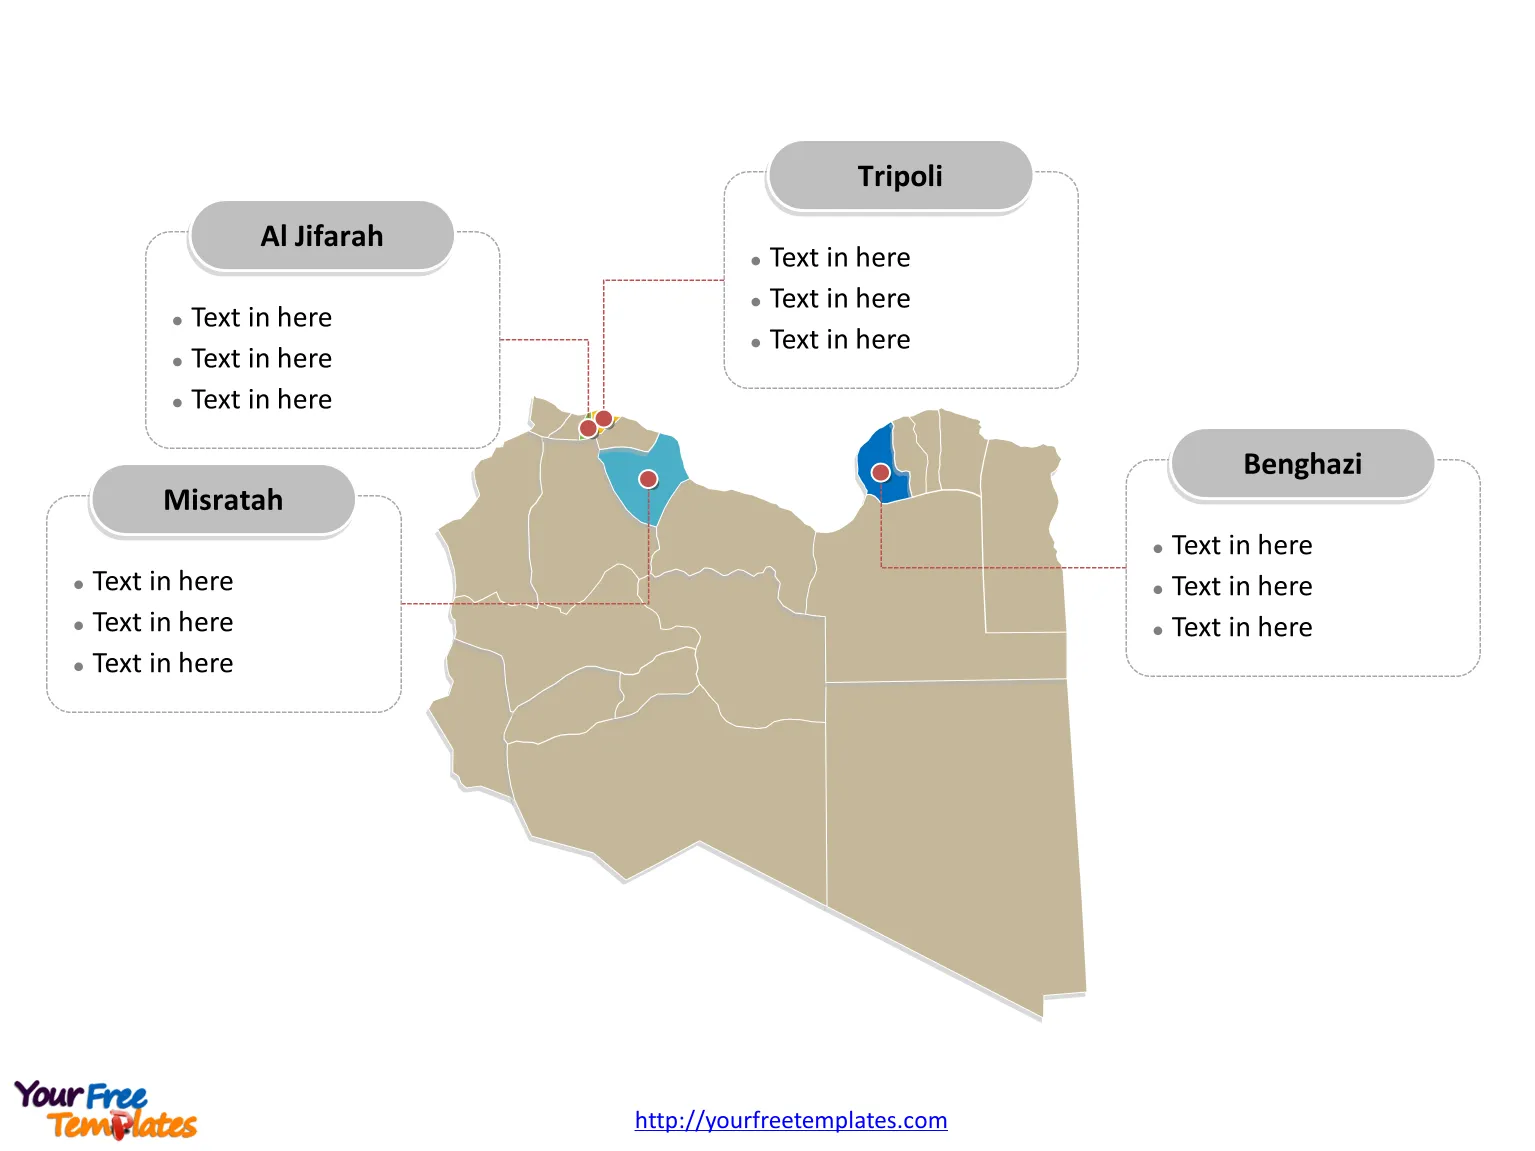 Libya map labeled with major political districts